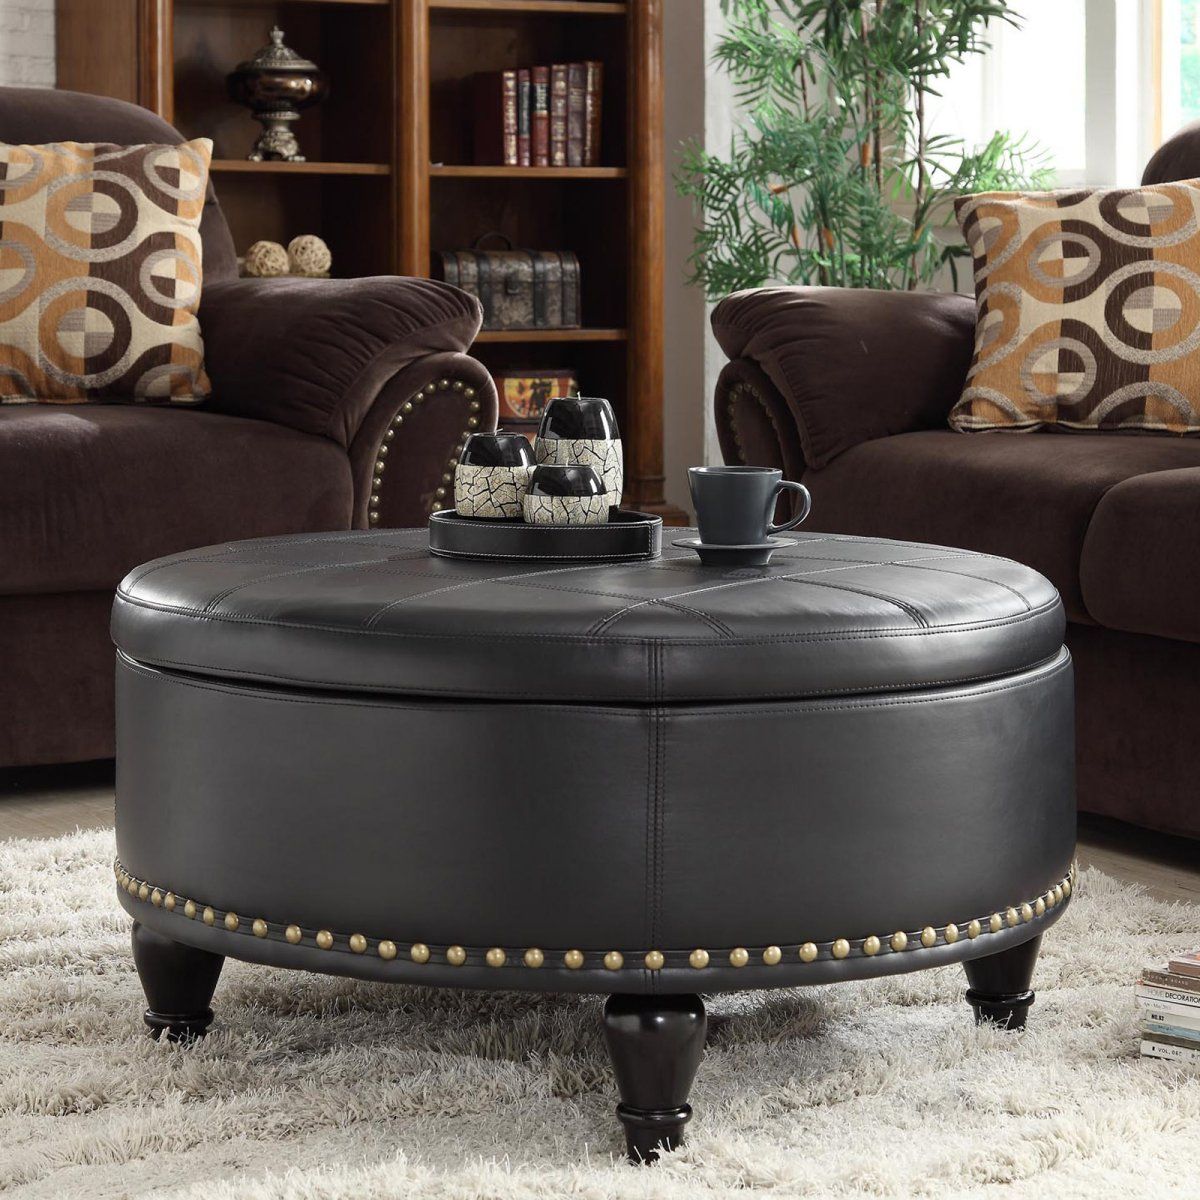 Unique And Creative! Tufted Leather Ottoman Coffee Table – Homesfeed In Black Faux Leather Tufted Ottomans (Gallery 20 of 20)